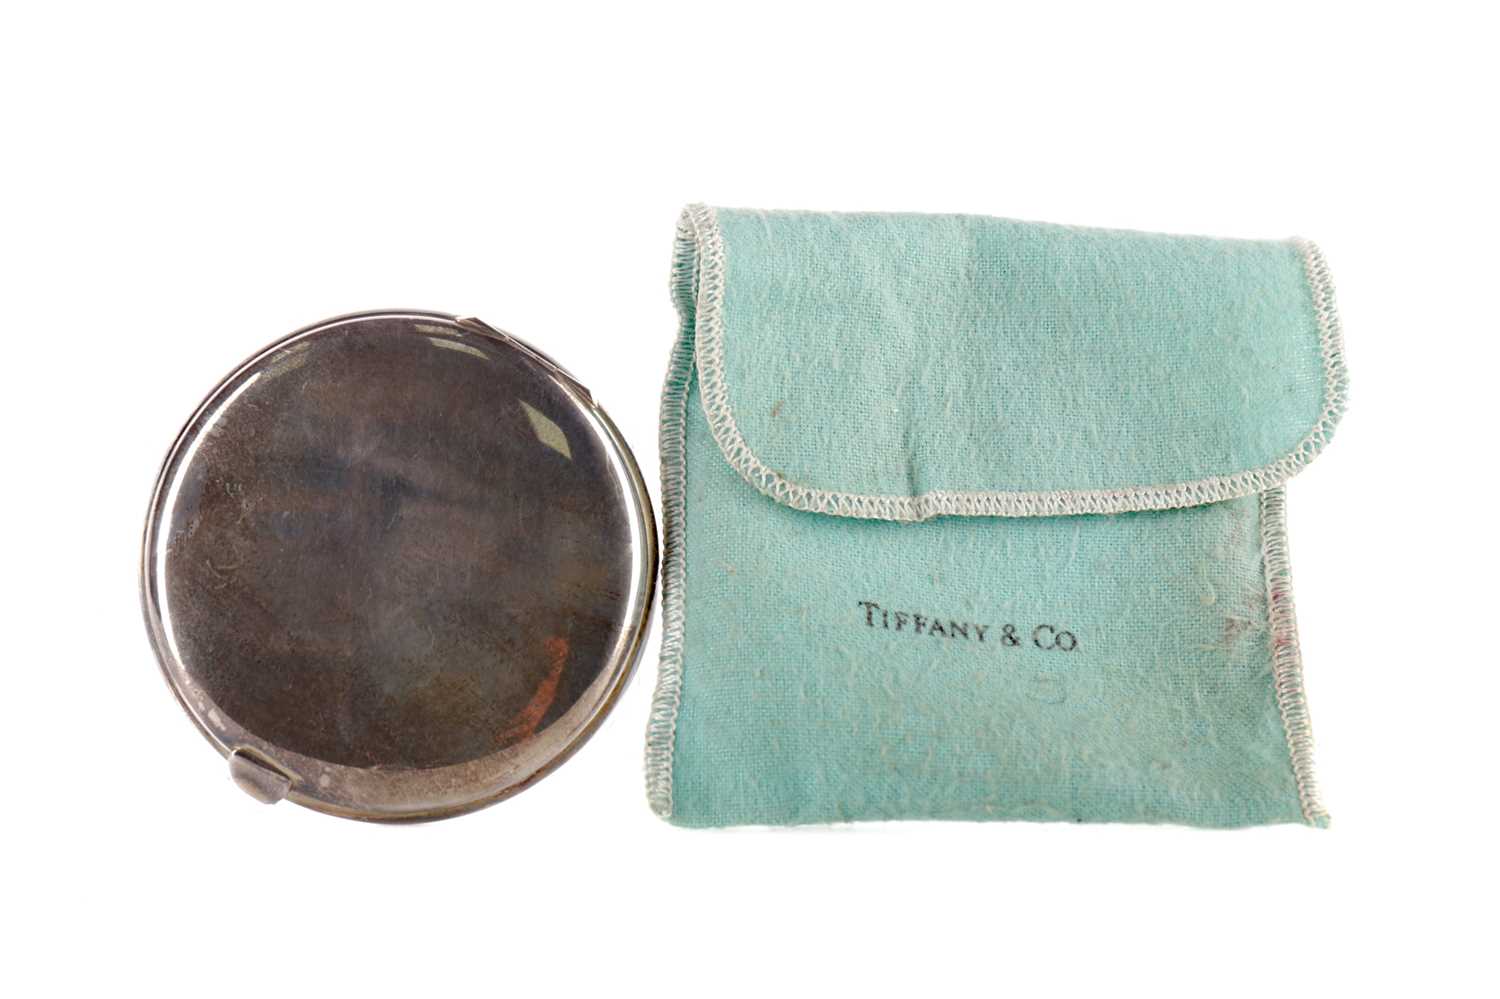 Lot 1709 - A STERLING SILVER CIRCULAR COMPACT BY TIFFANY & CO.